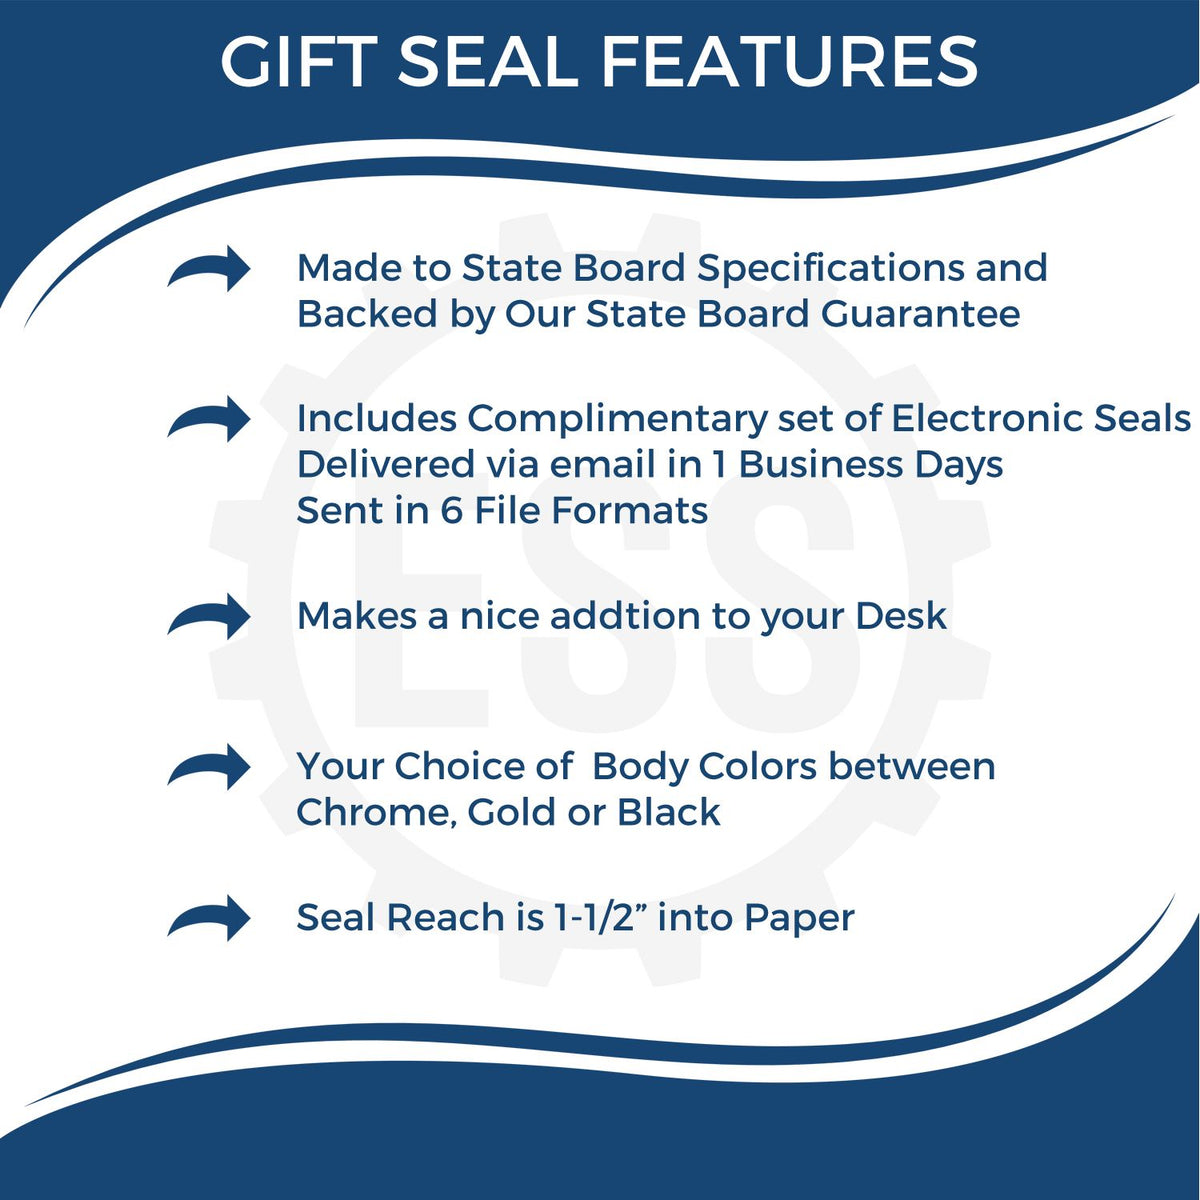 A picture of an infographic highlighting the selling points for the Gift South Carolina Land Surveyor Seal